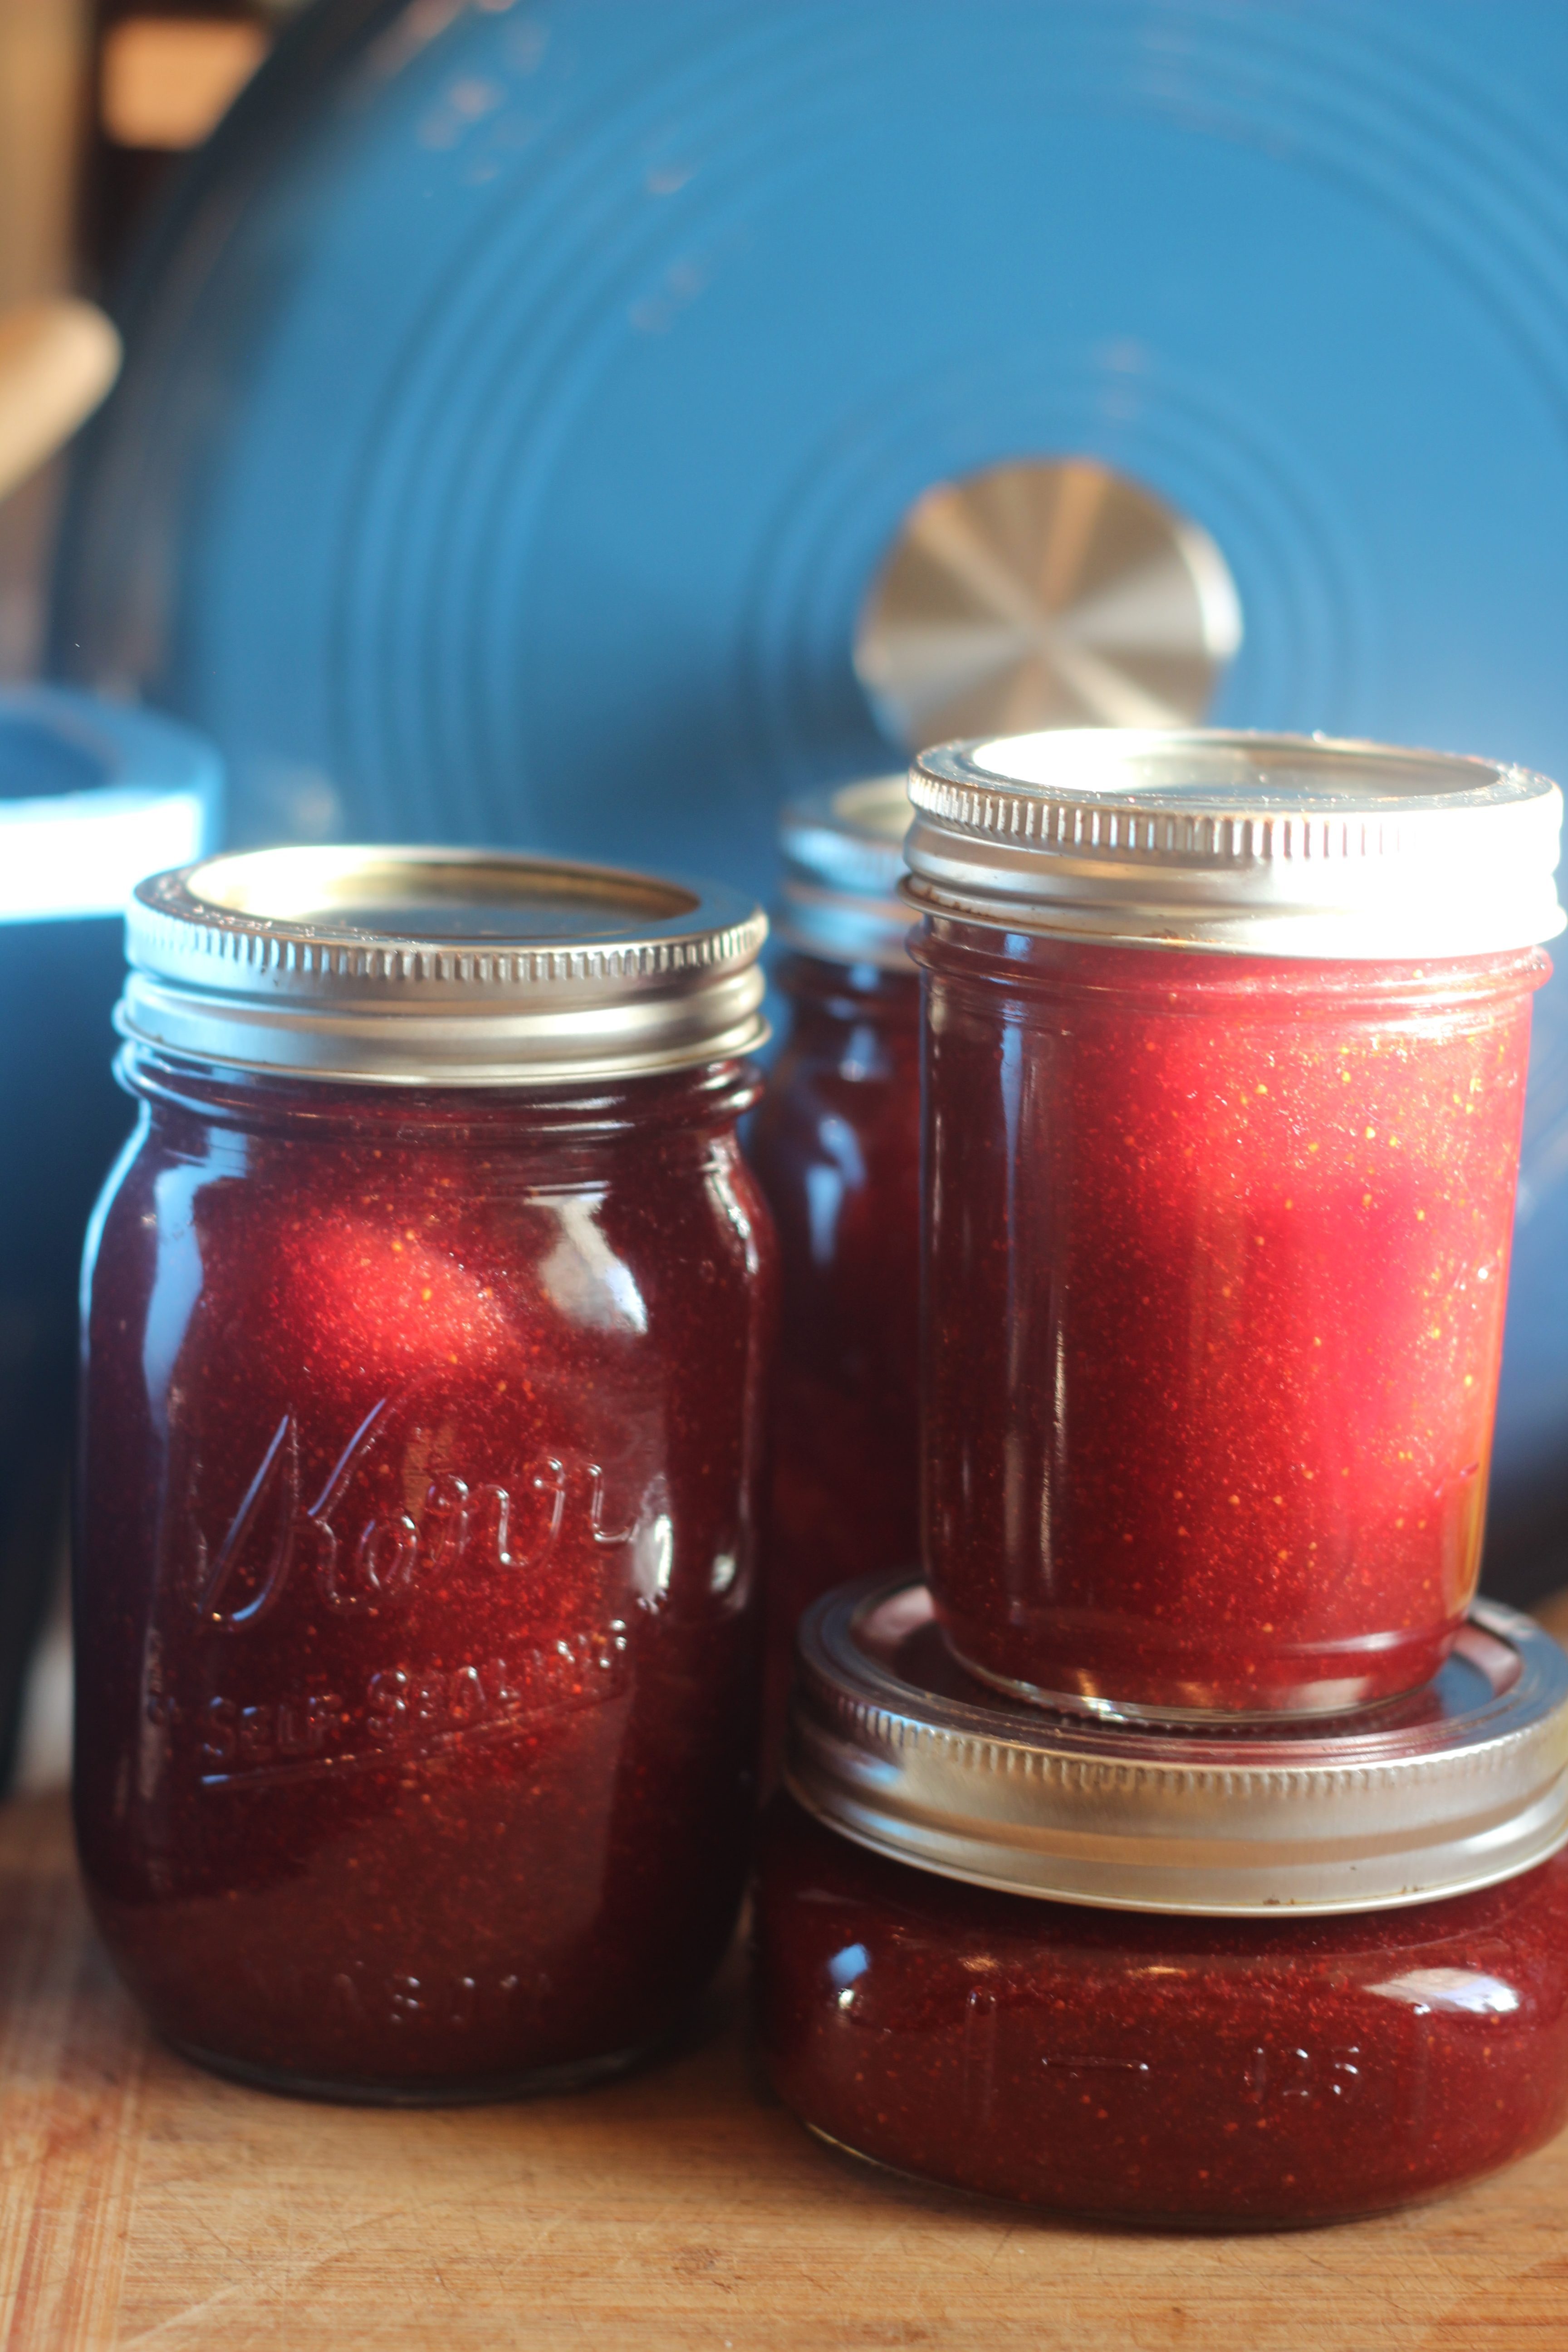 Pectin-free strawberry jam is a labor of love